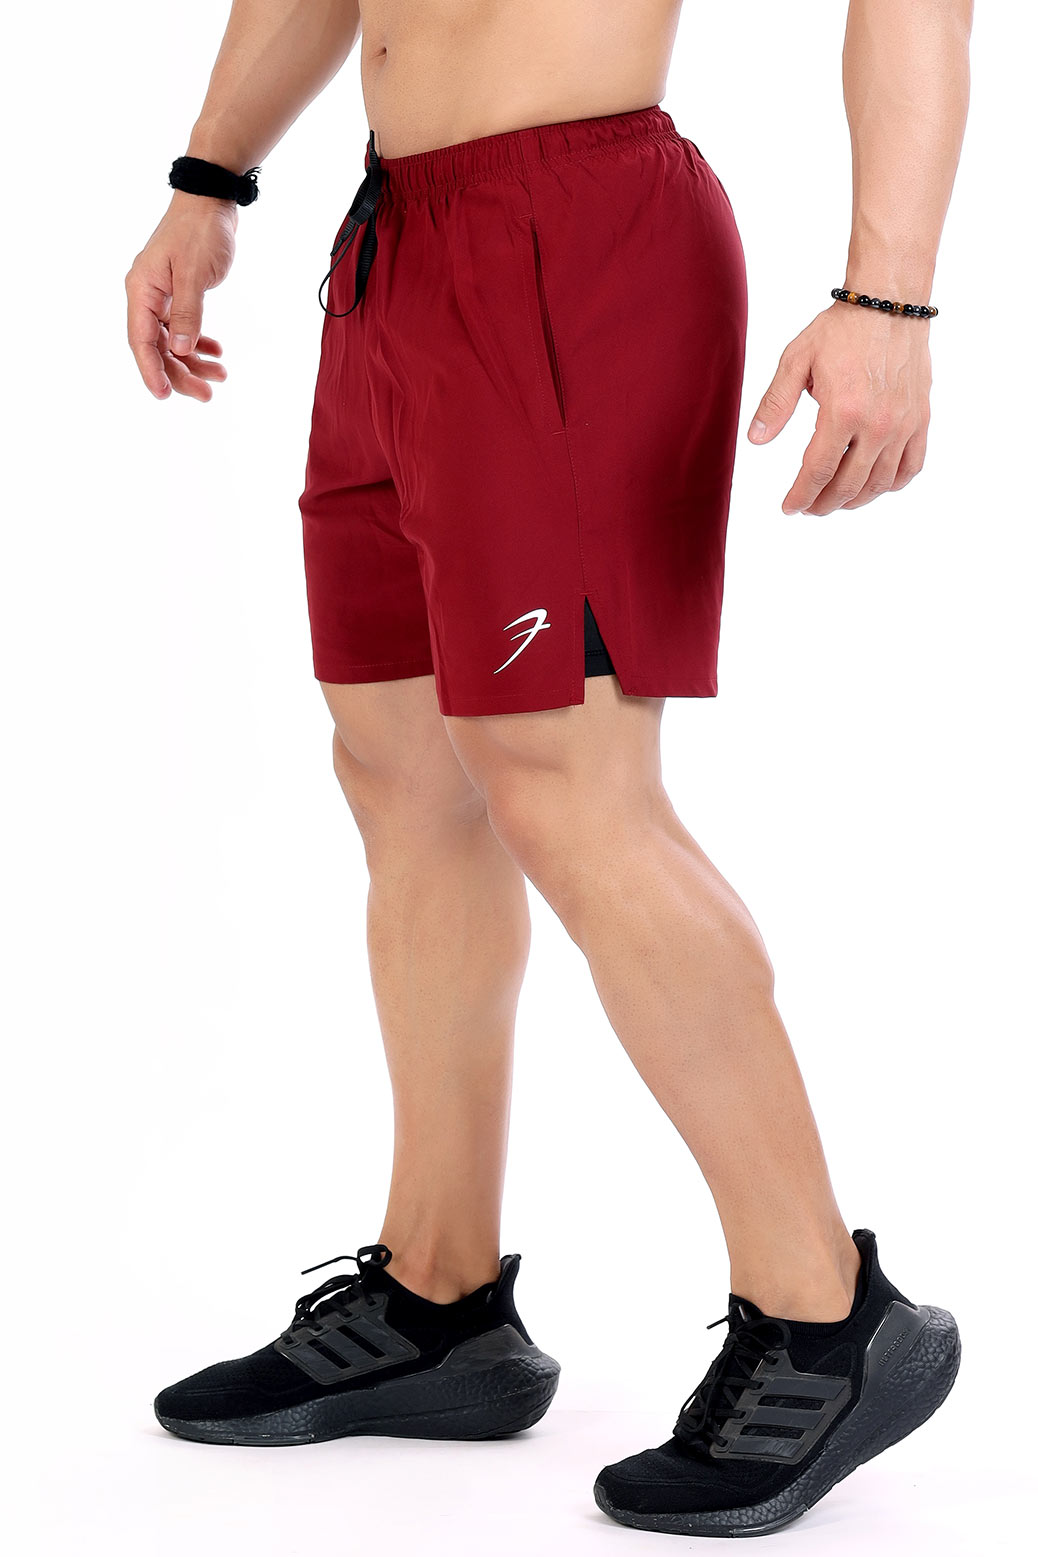 2 in 1 Compression Shorts Maroon